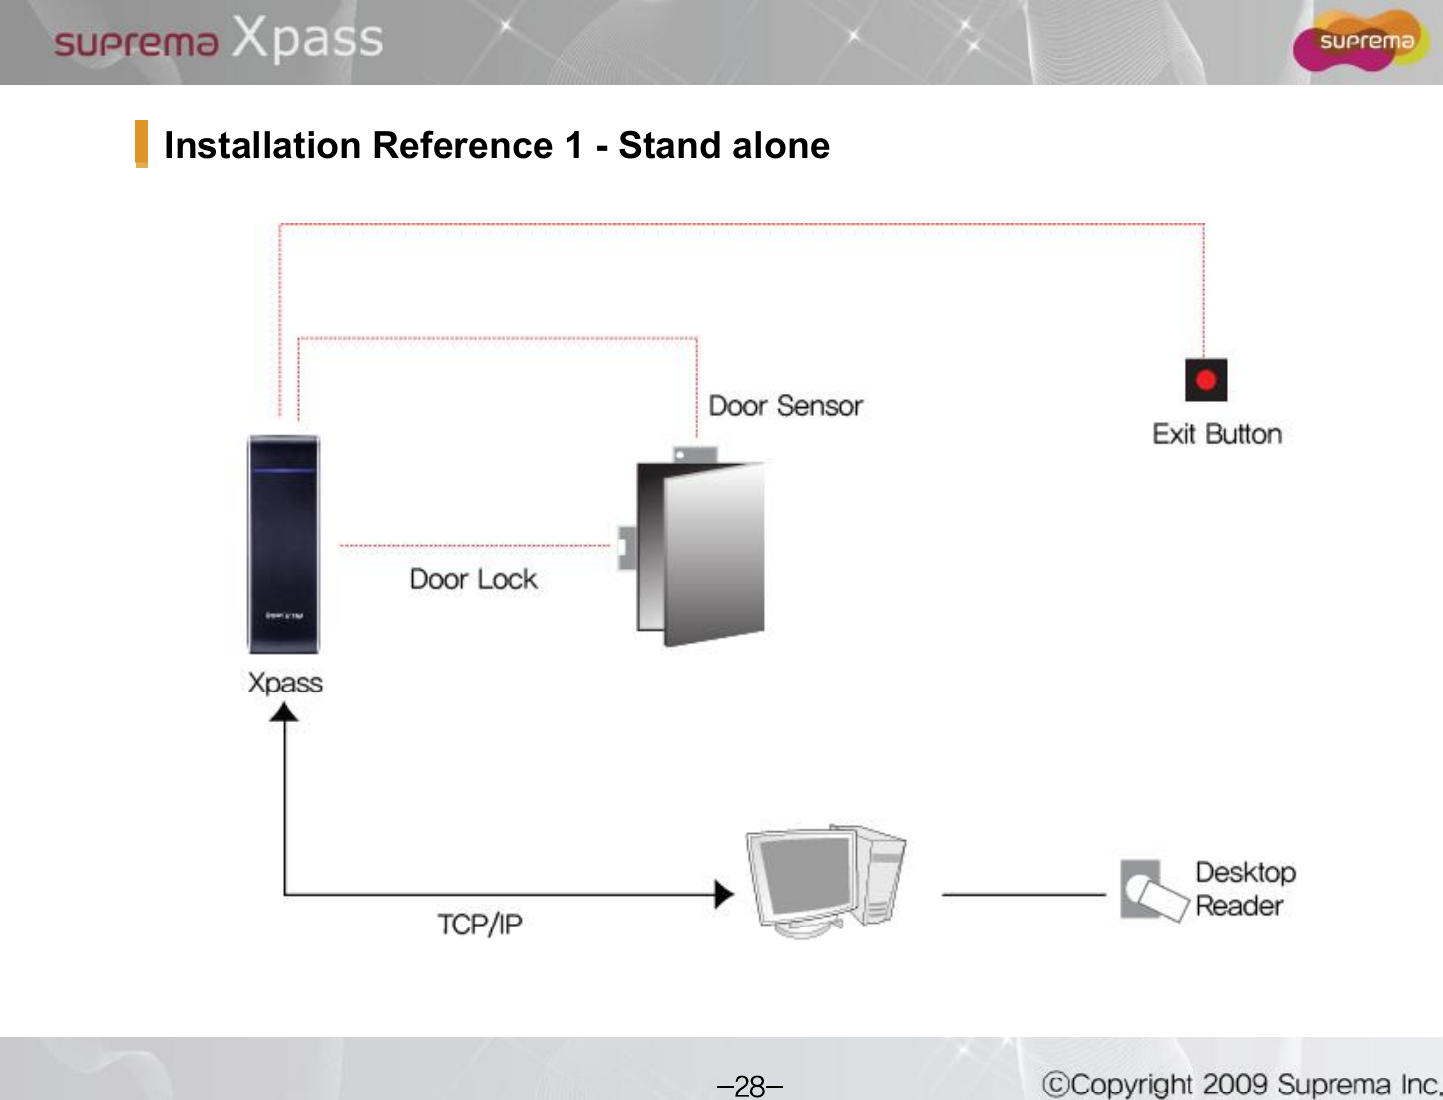 Installation Reference 1 -Stand alone